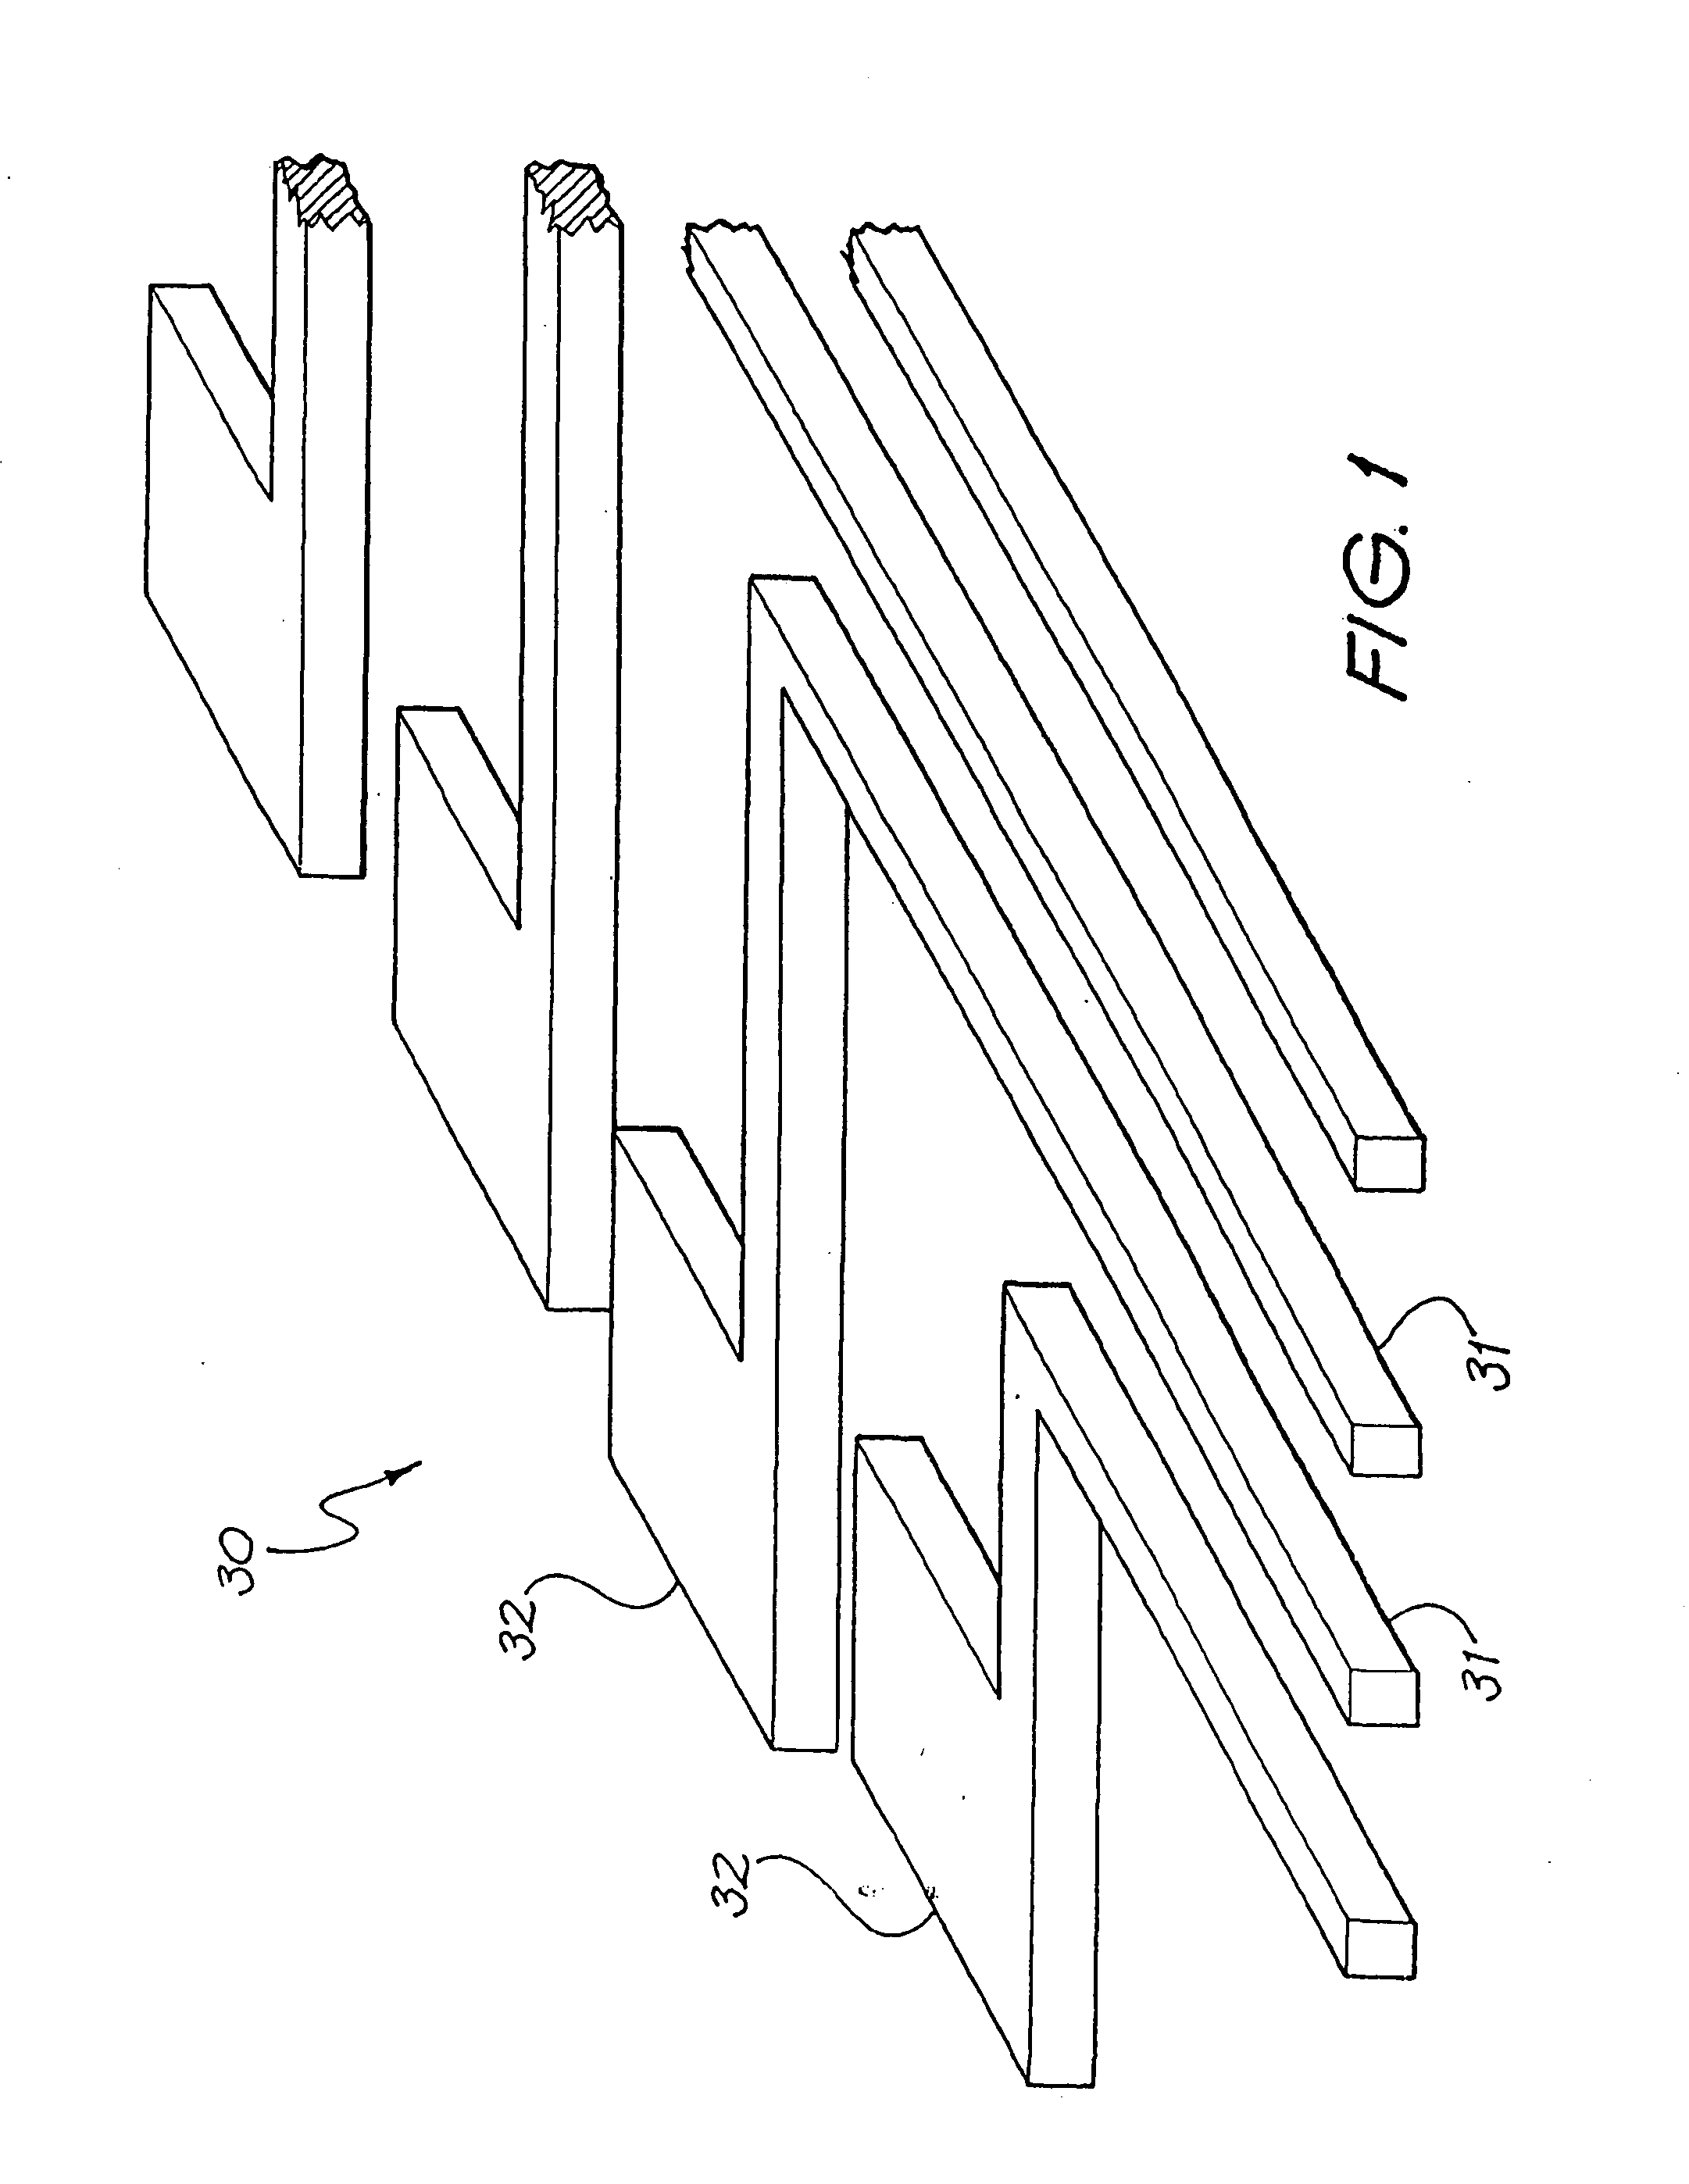 Process for manufacturing electronically conductive components